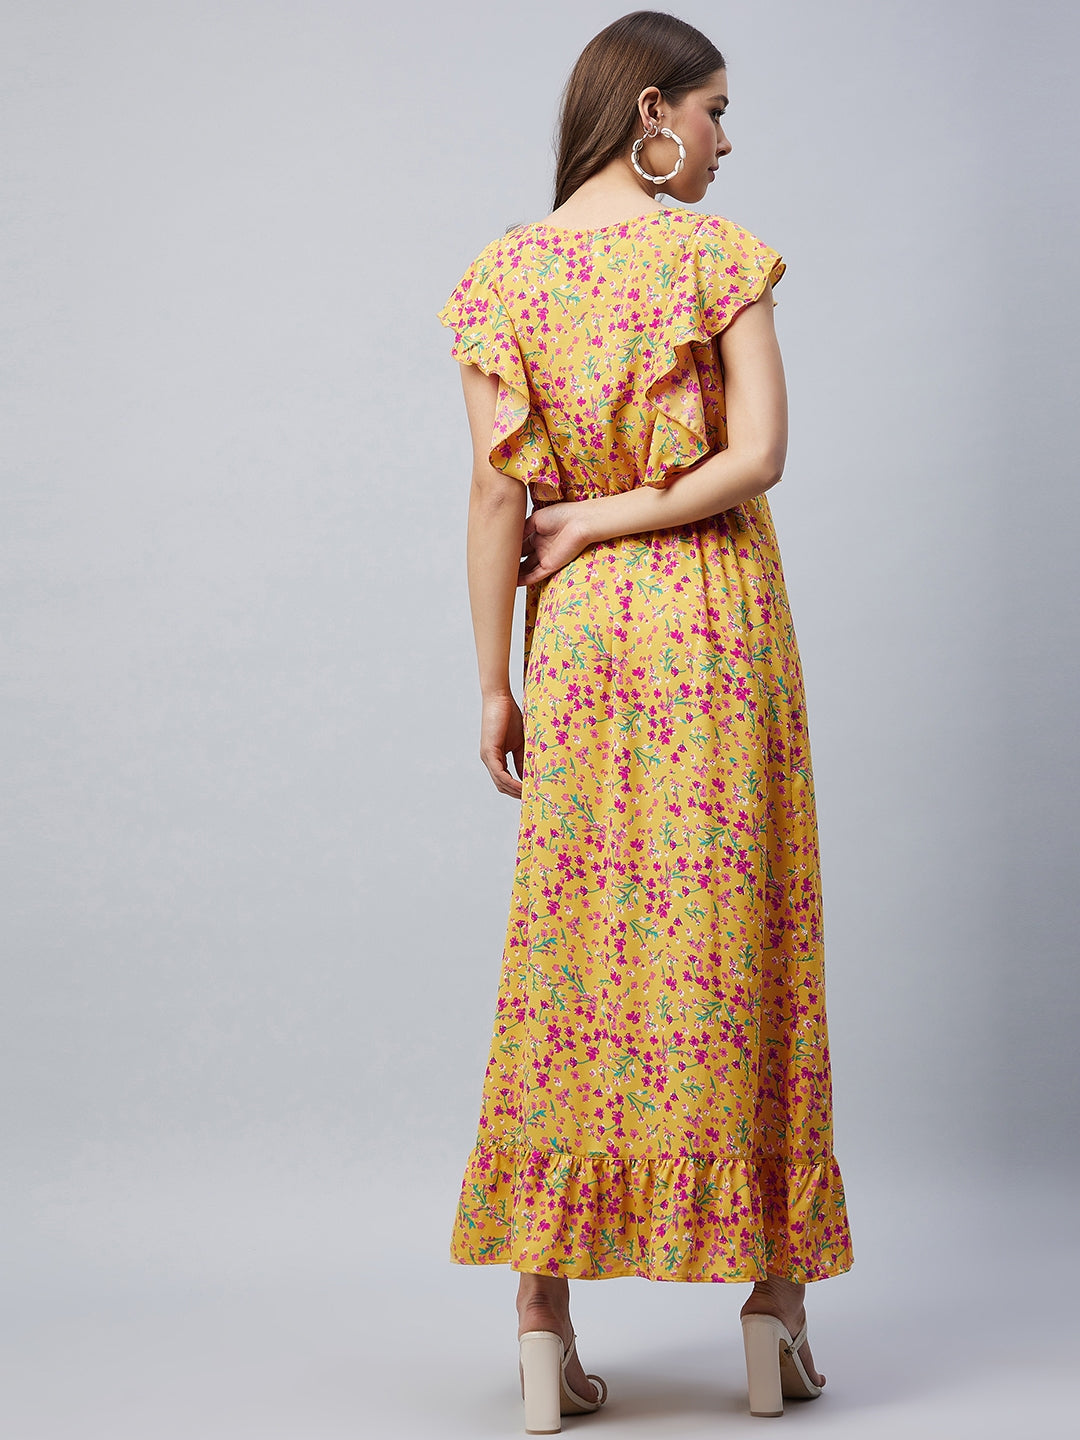 Women's Mustard Floral Maxi Dress with Flutter Sleeves